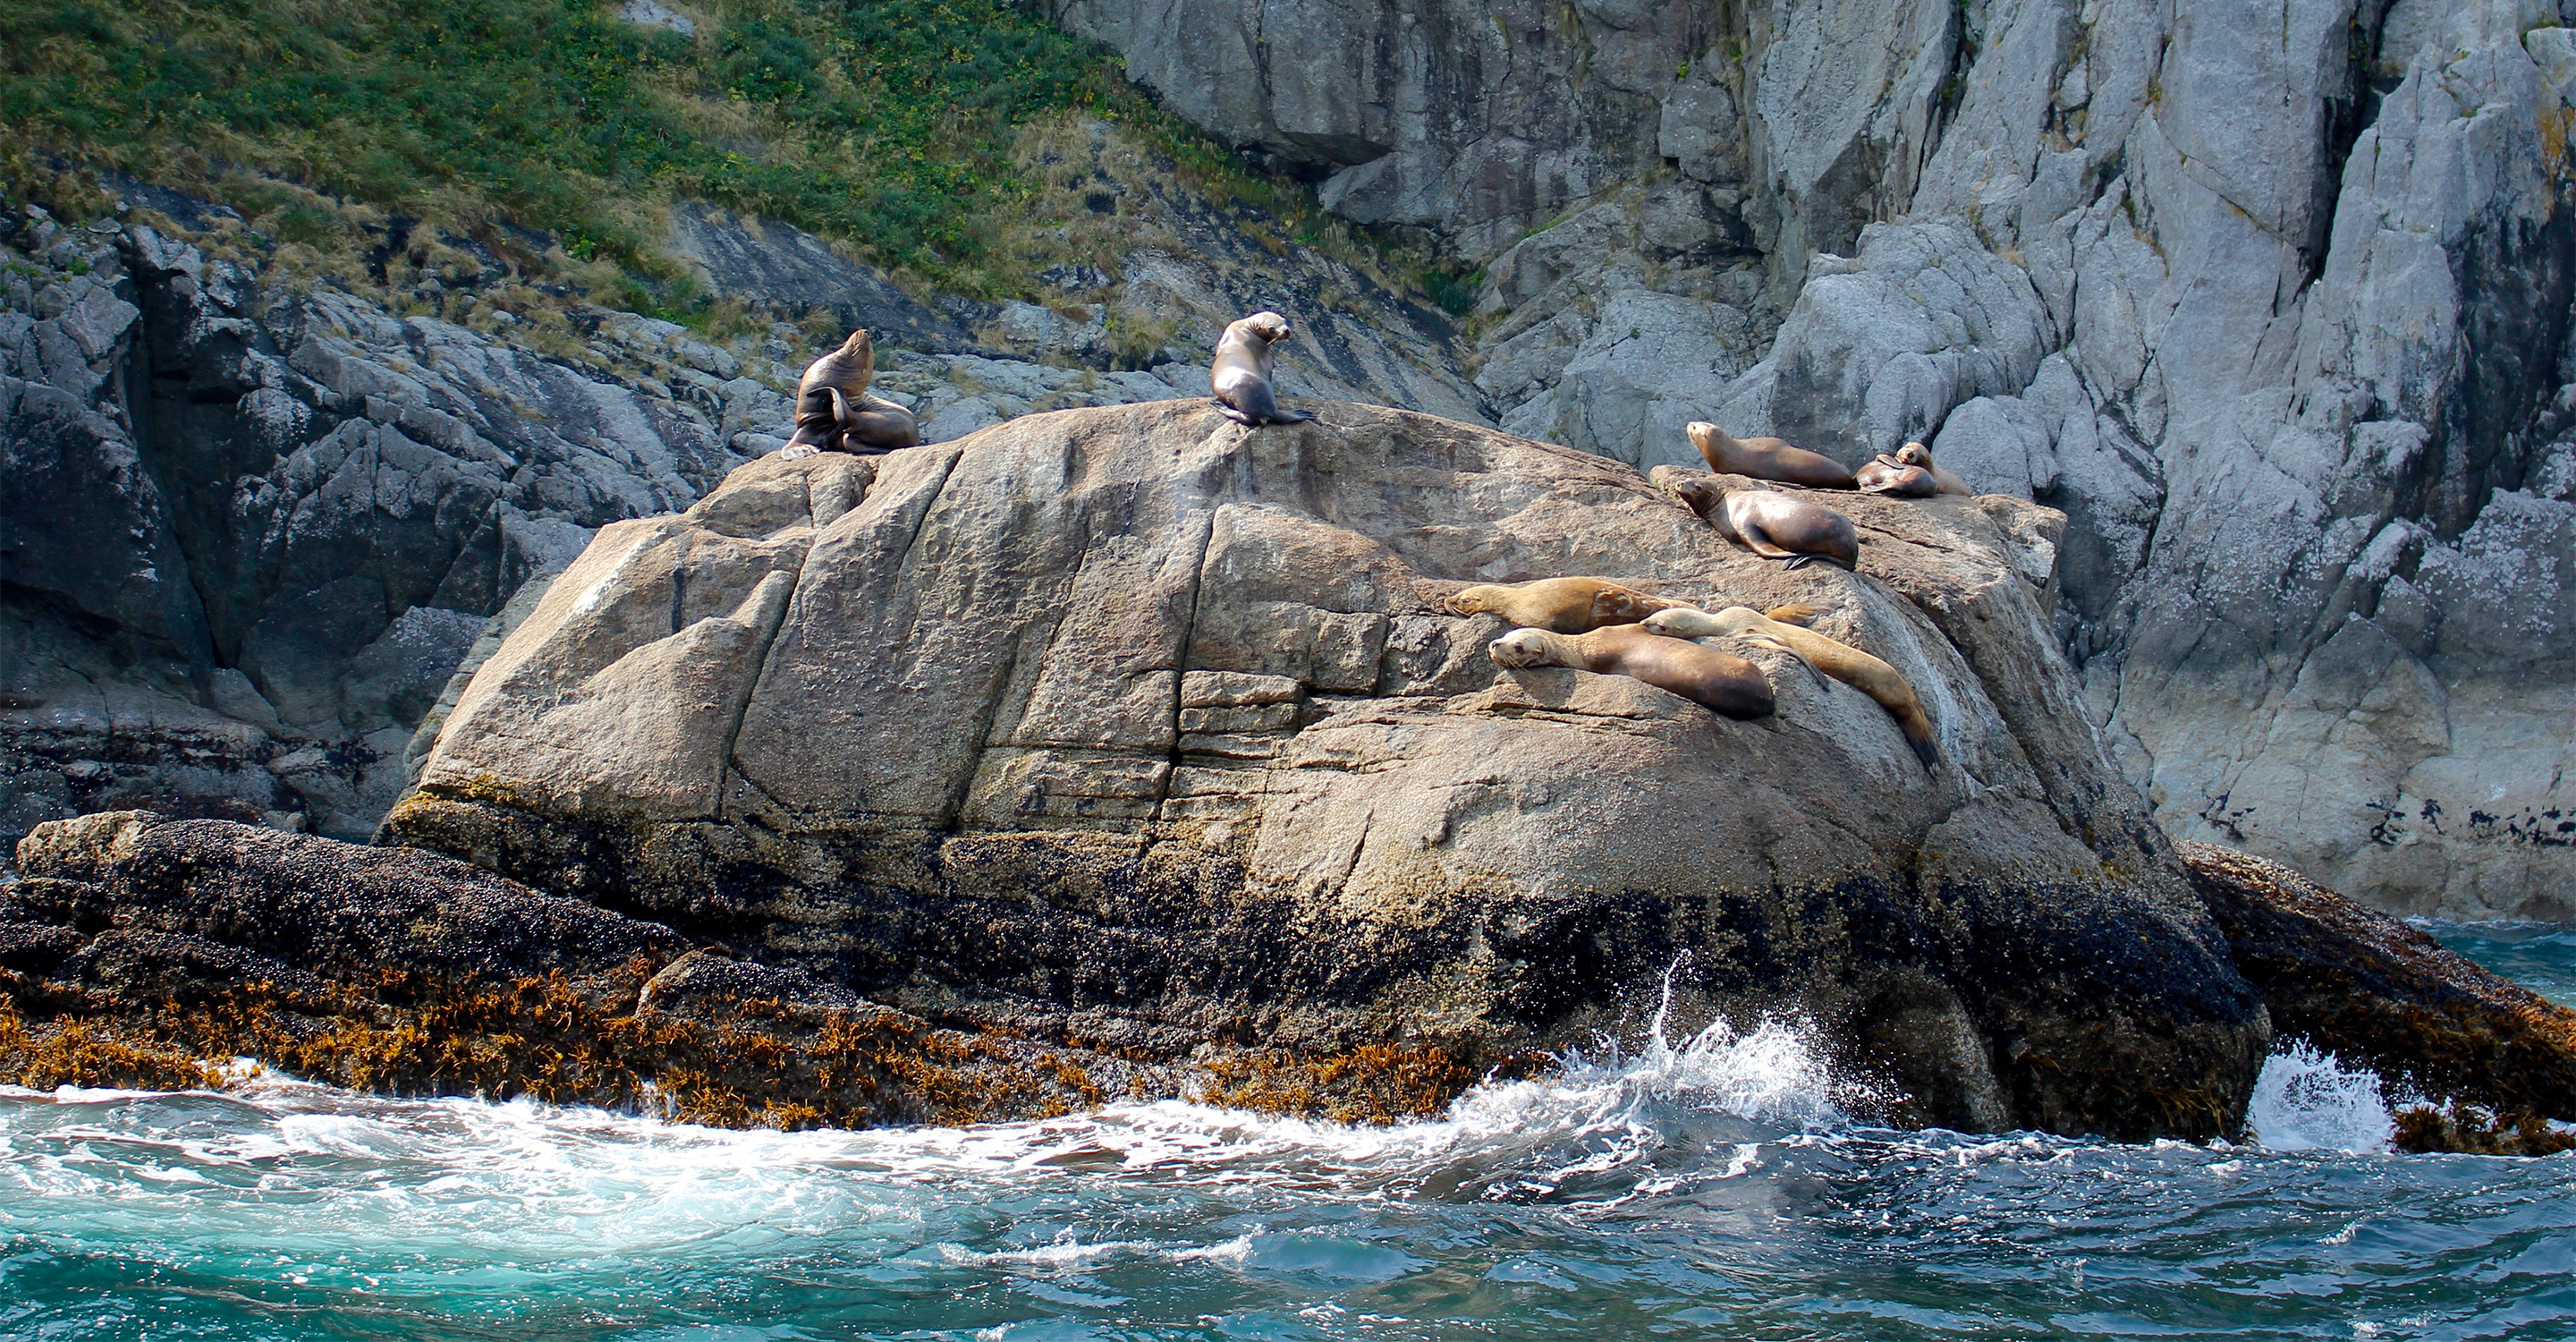 Ogling at sea lions while on a boat tour in Alaska's Kenai Fjords National Park.